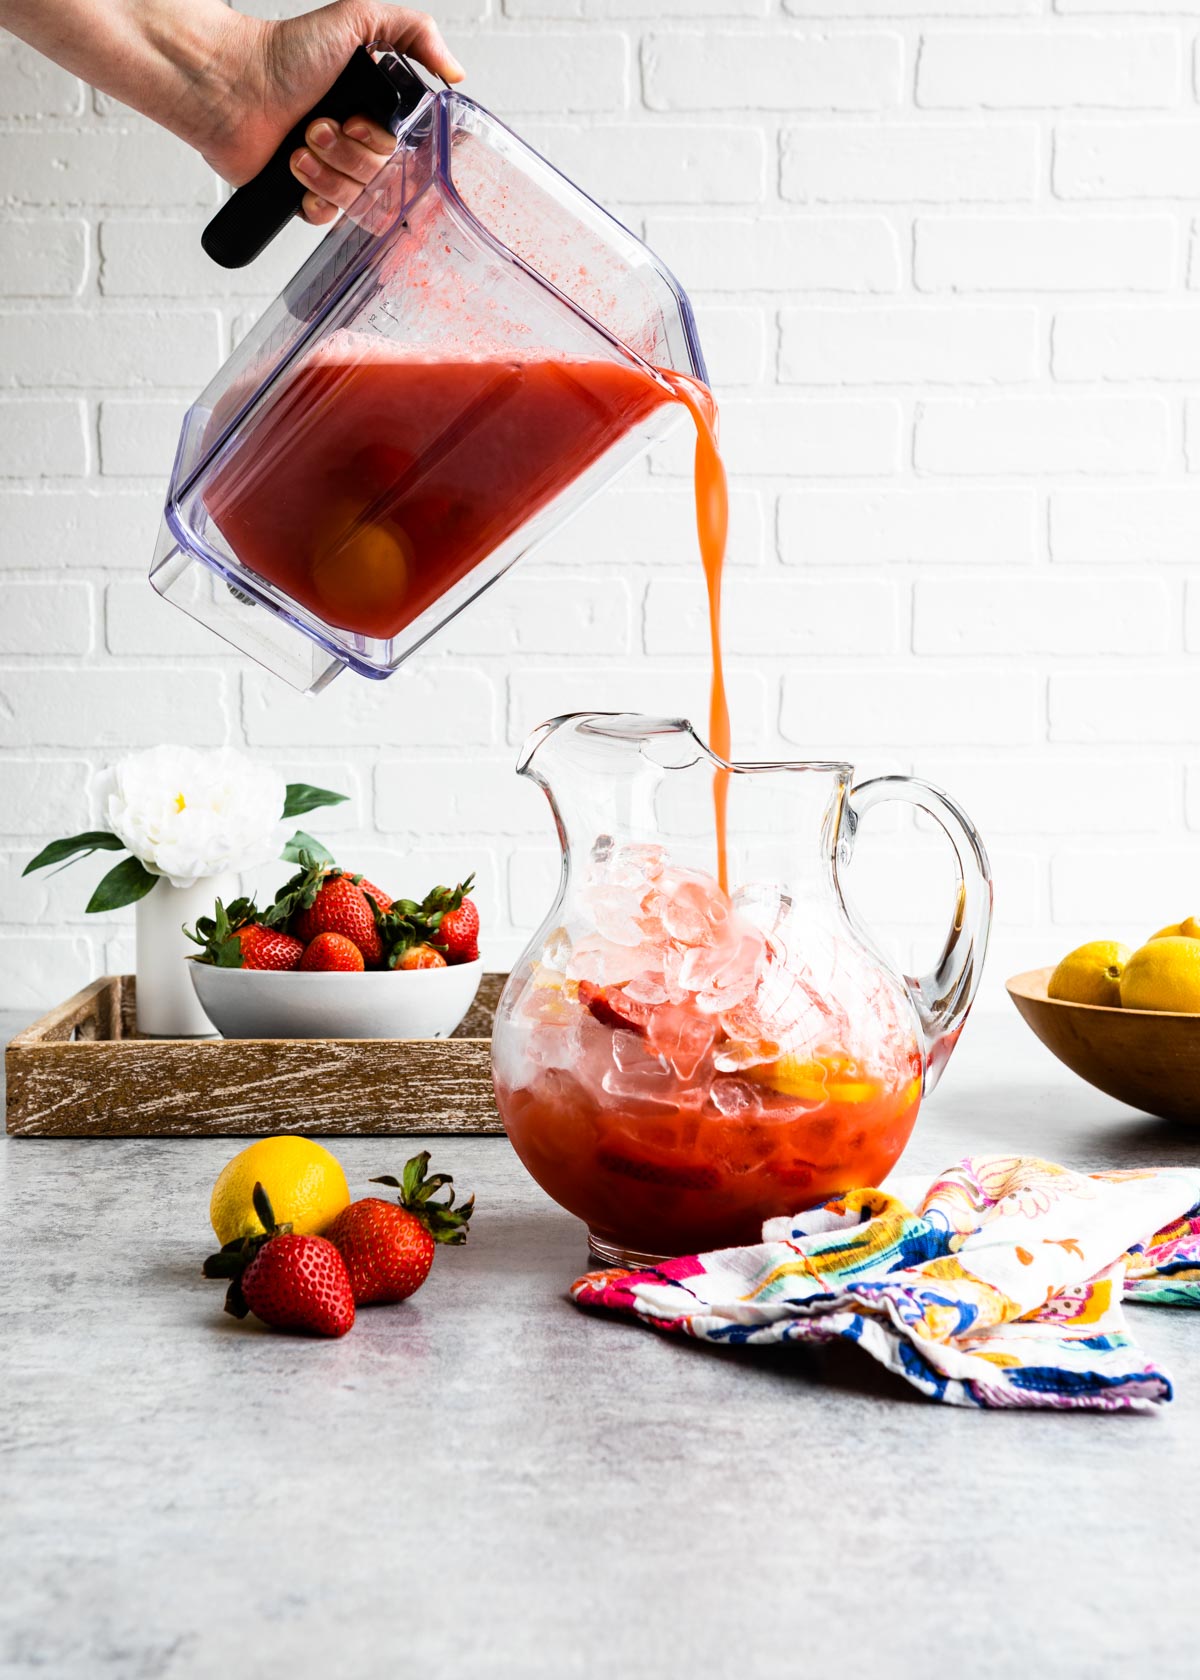 pouring homemade strawberry lemonade from the blender to a glass pitcher full of ice